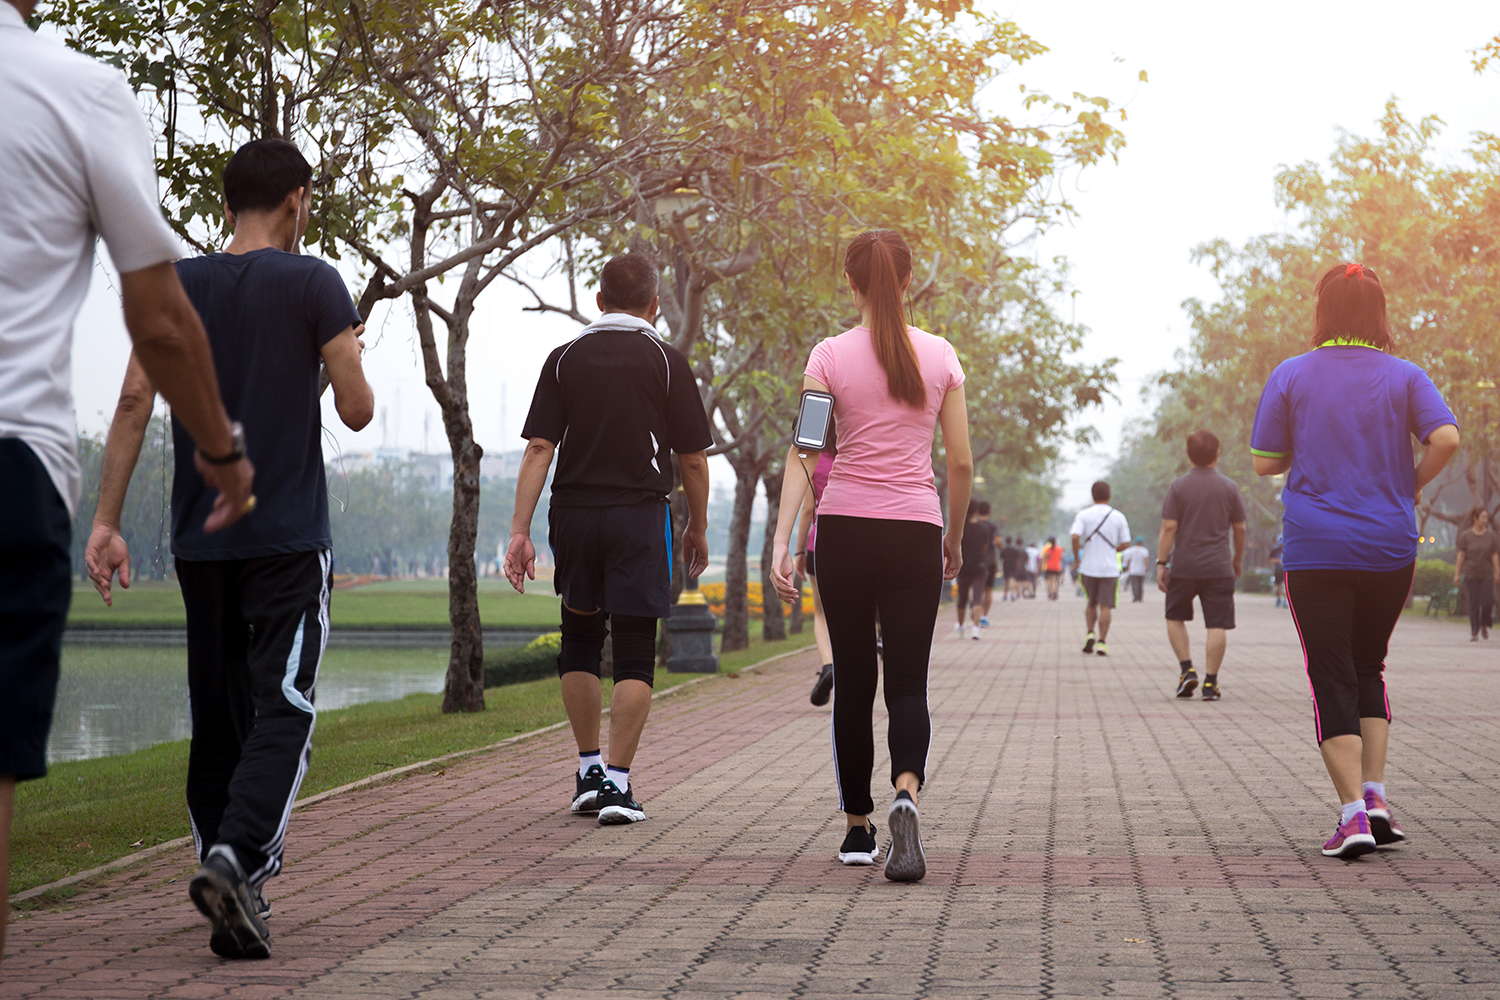 Get your shoes on! Six ways walking helps you become healthier.